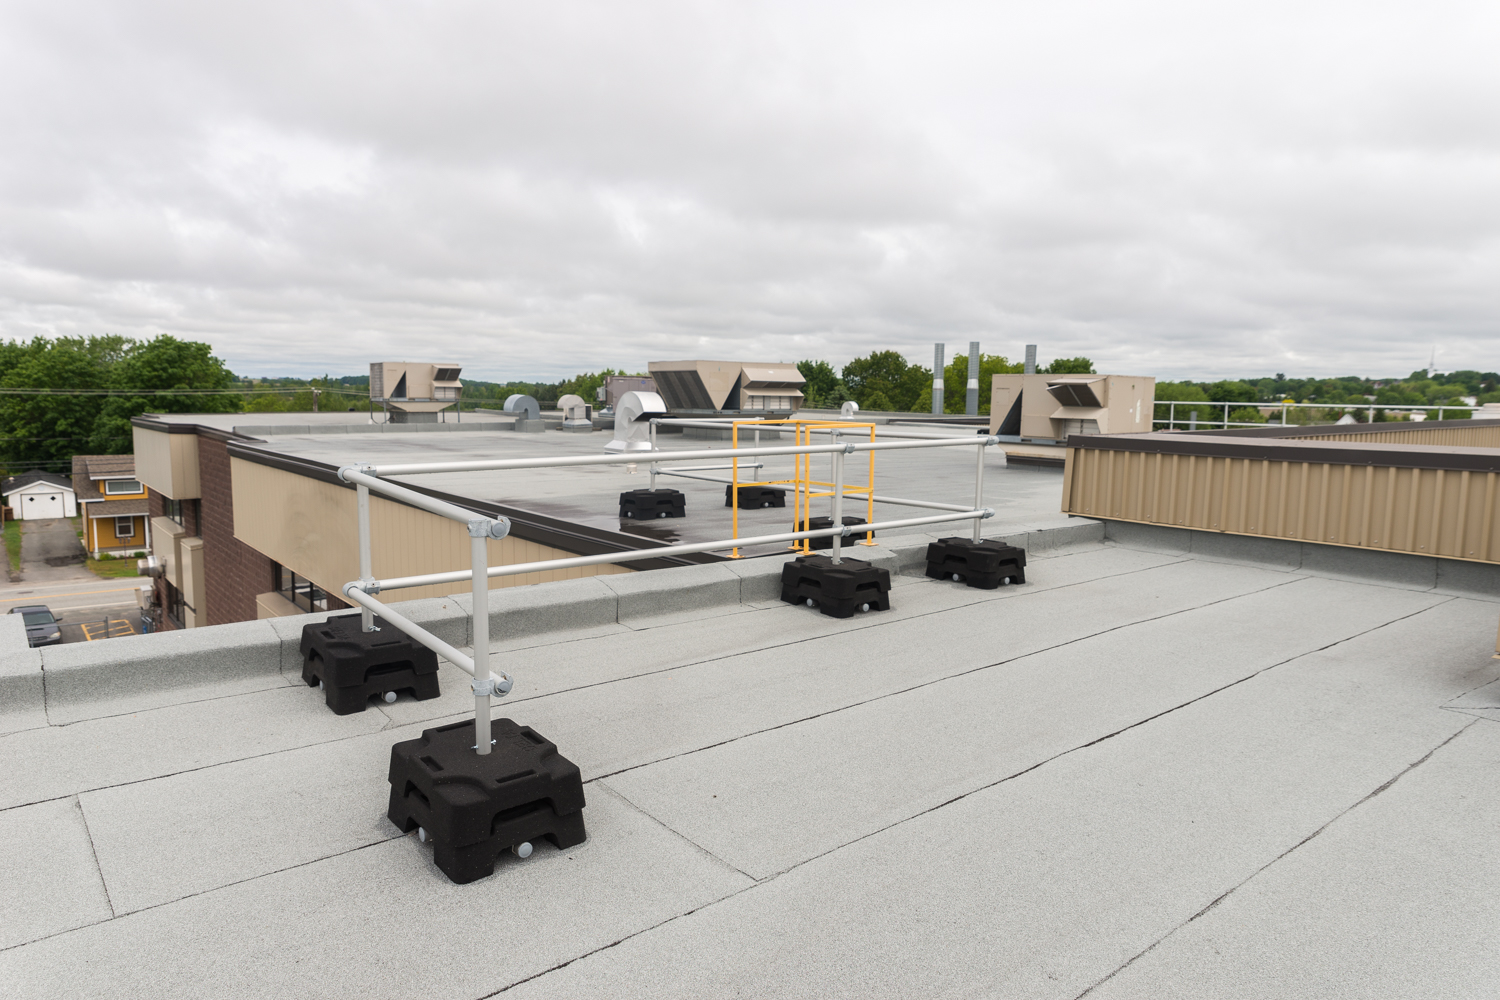 Beyond the norms: Exceptional roof fall protection for this multinational company